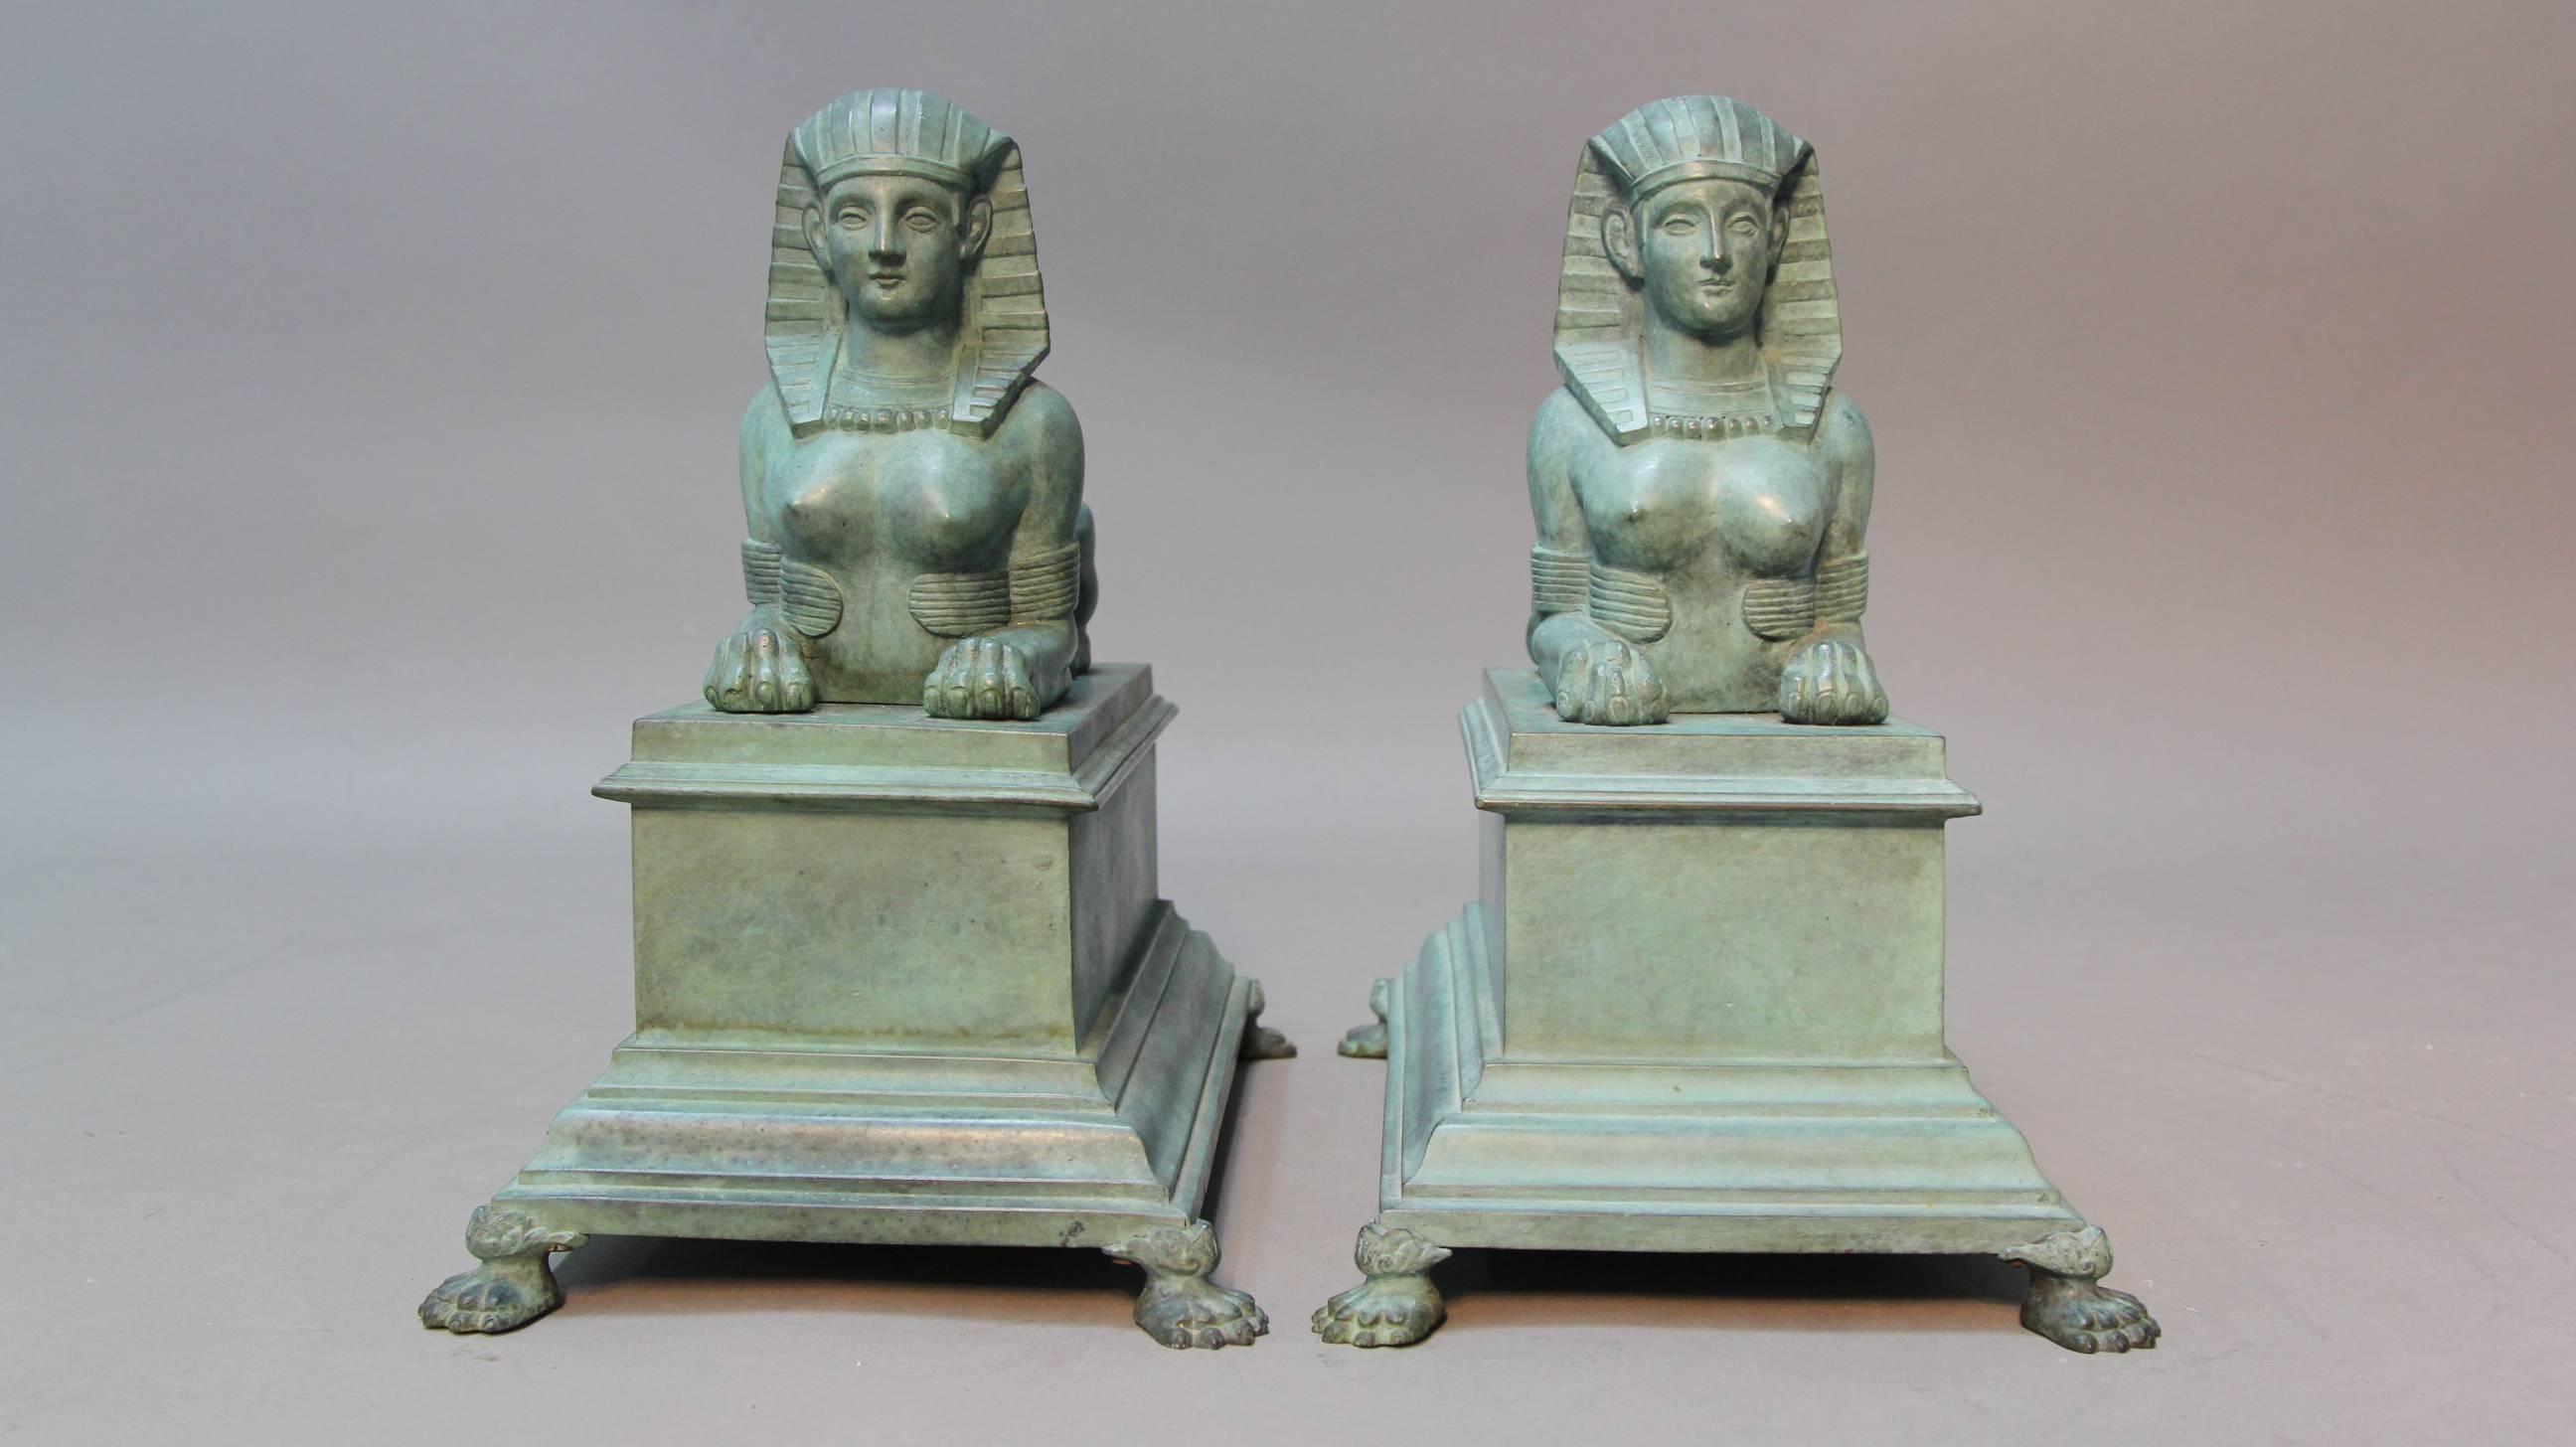 A circa 1900 large pair of patinated French bronze Egyptian revival sphinx sculptures. Realistically formed with extreme attention to detail.